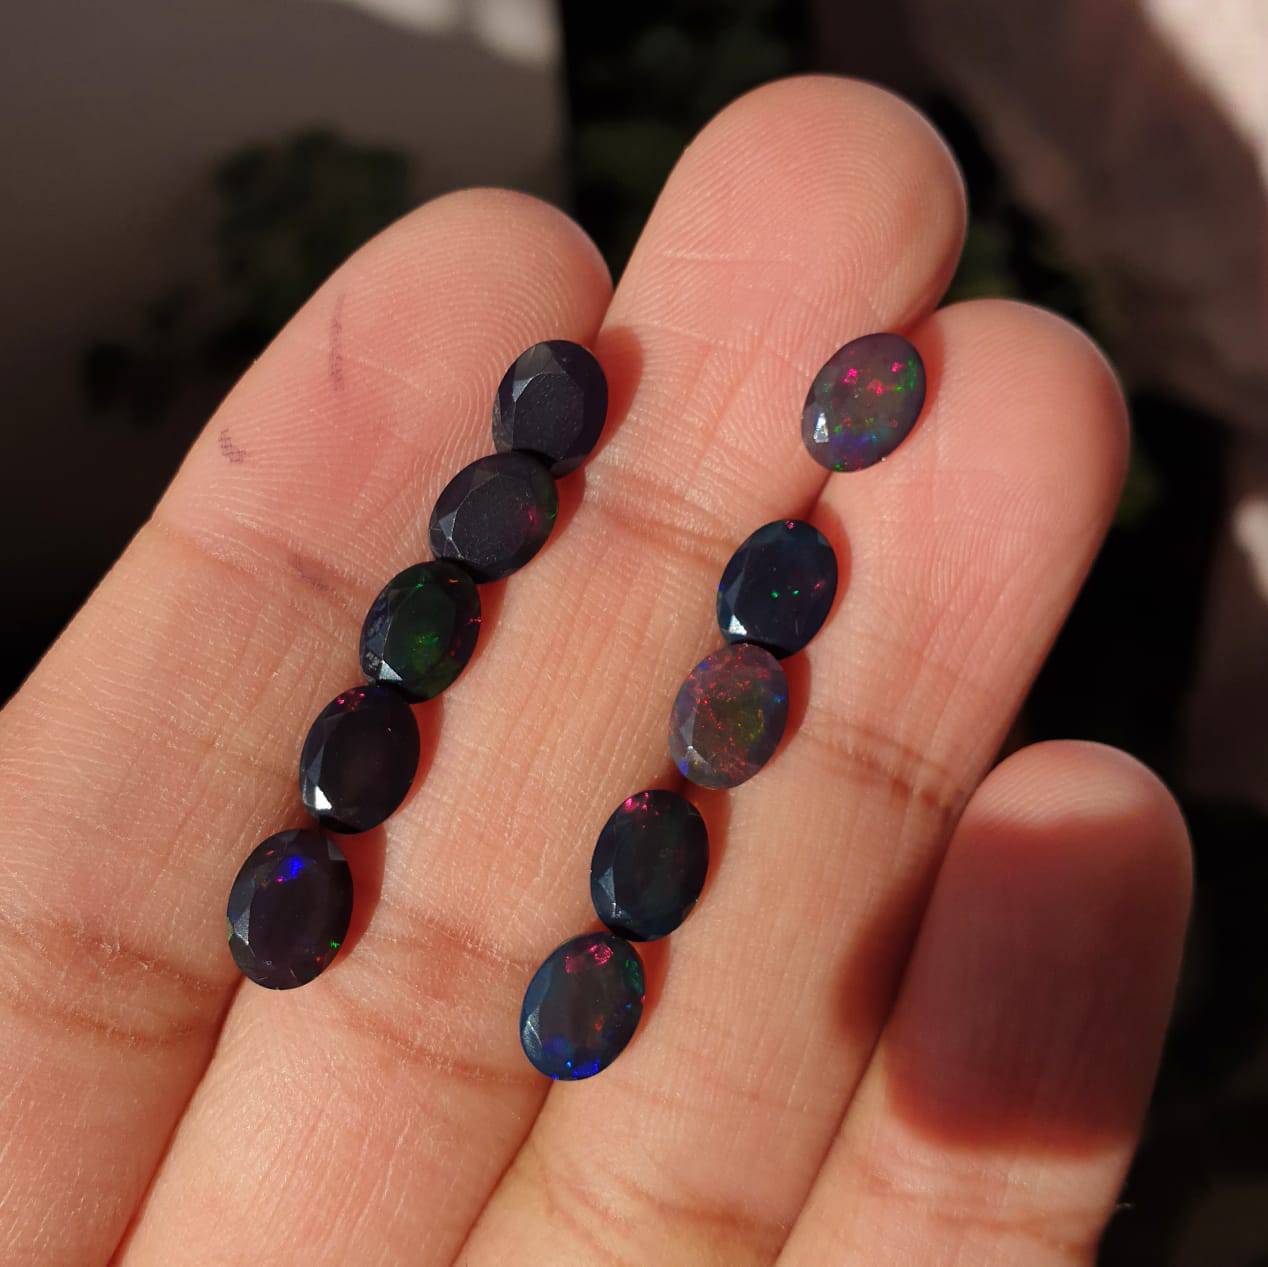 6 Pcs Natural Black Opal 8mm Ovals | Faceted in 8x6mm - The LabradoriteKing